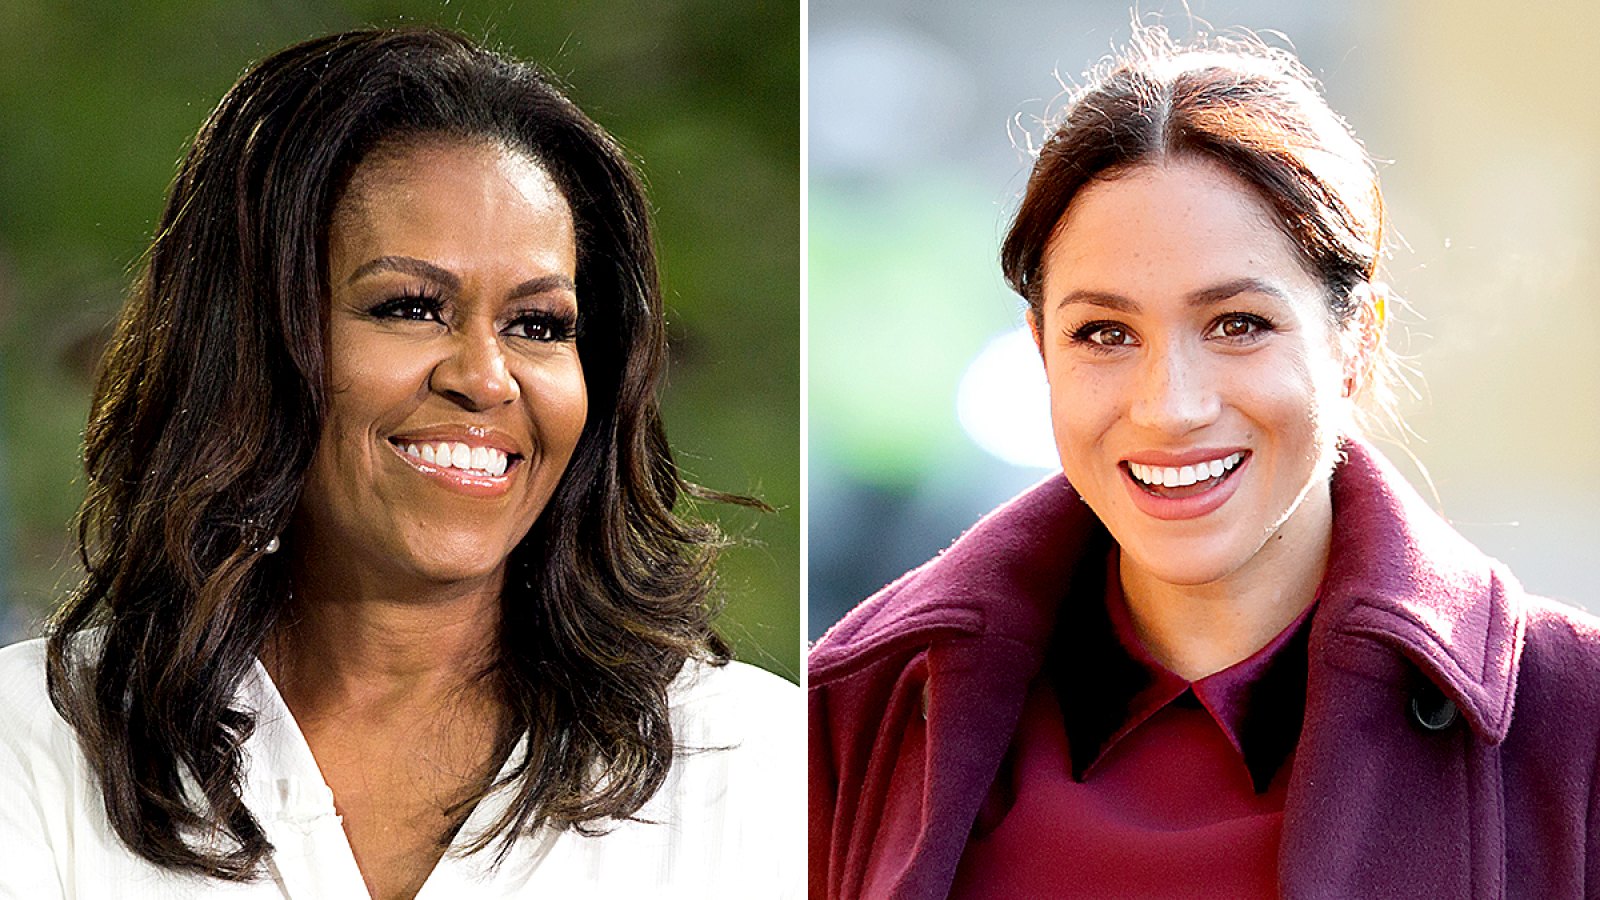 Michelle Obama and Duchess Meghan